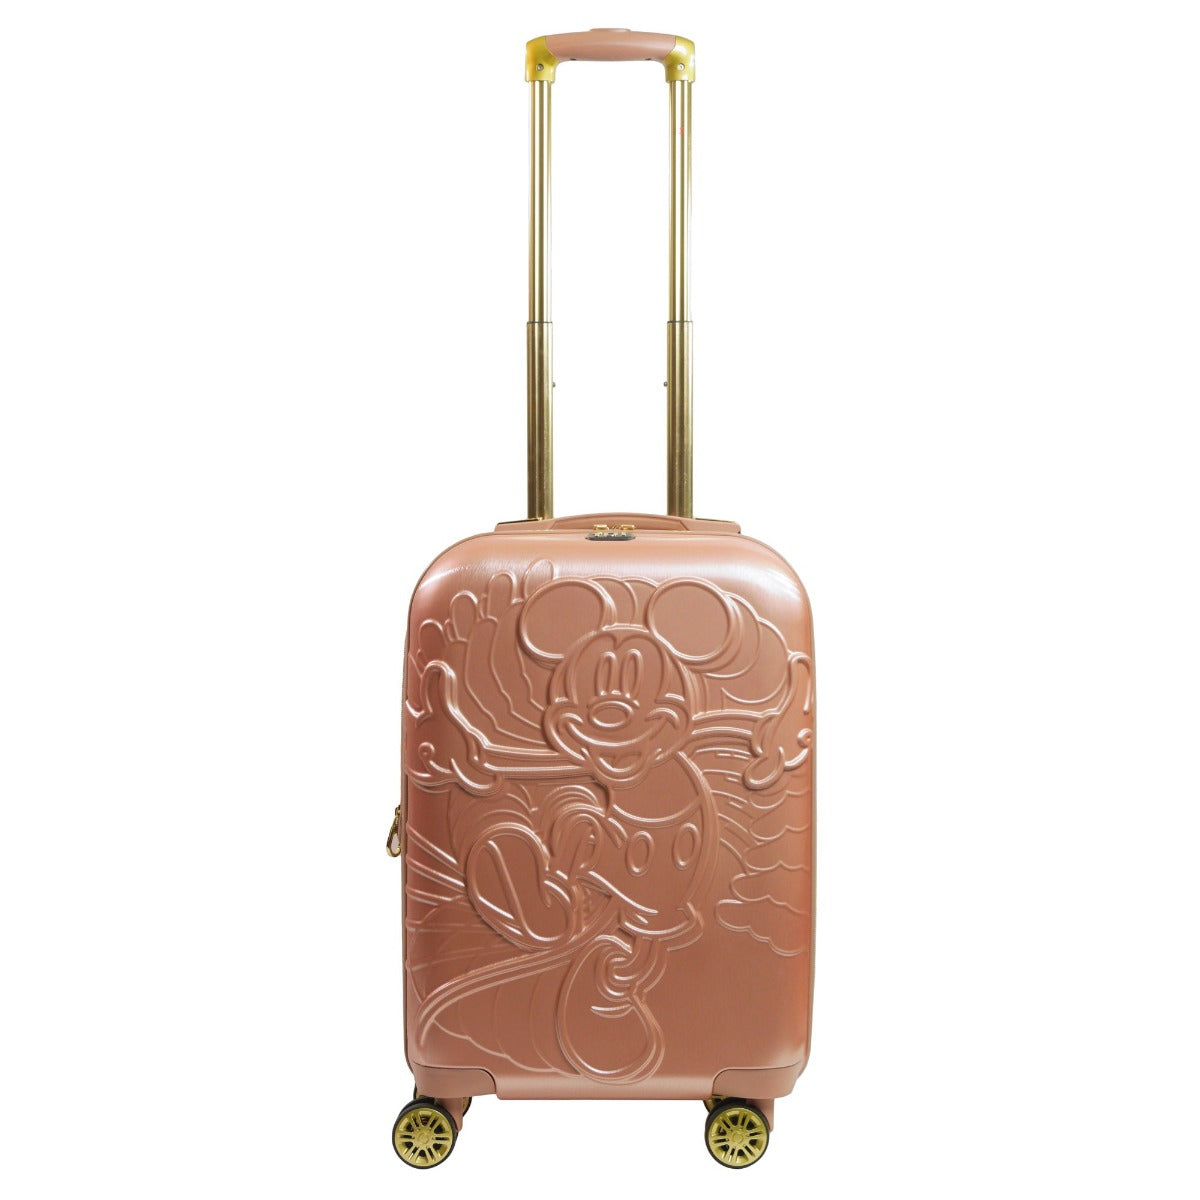 Ful Embossed Disney Mickey Mouse hardsided spinner suitcase 22 inch carry on luggage rose gold pink expandable 2 inch \